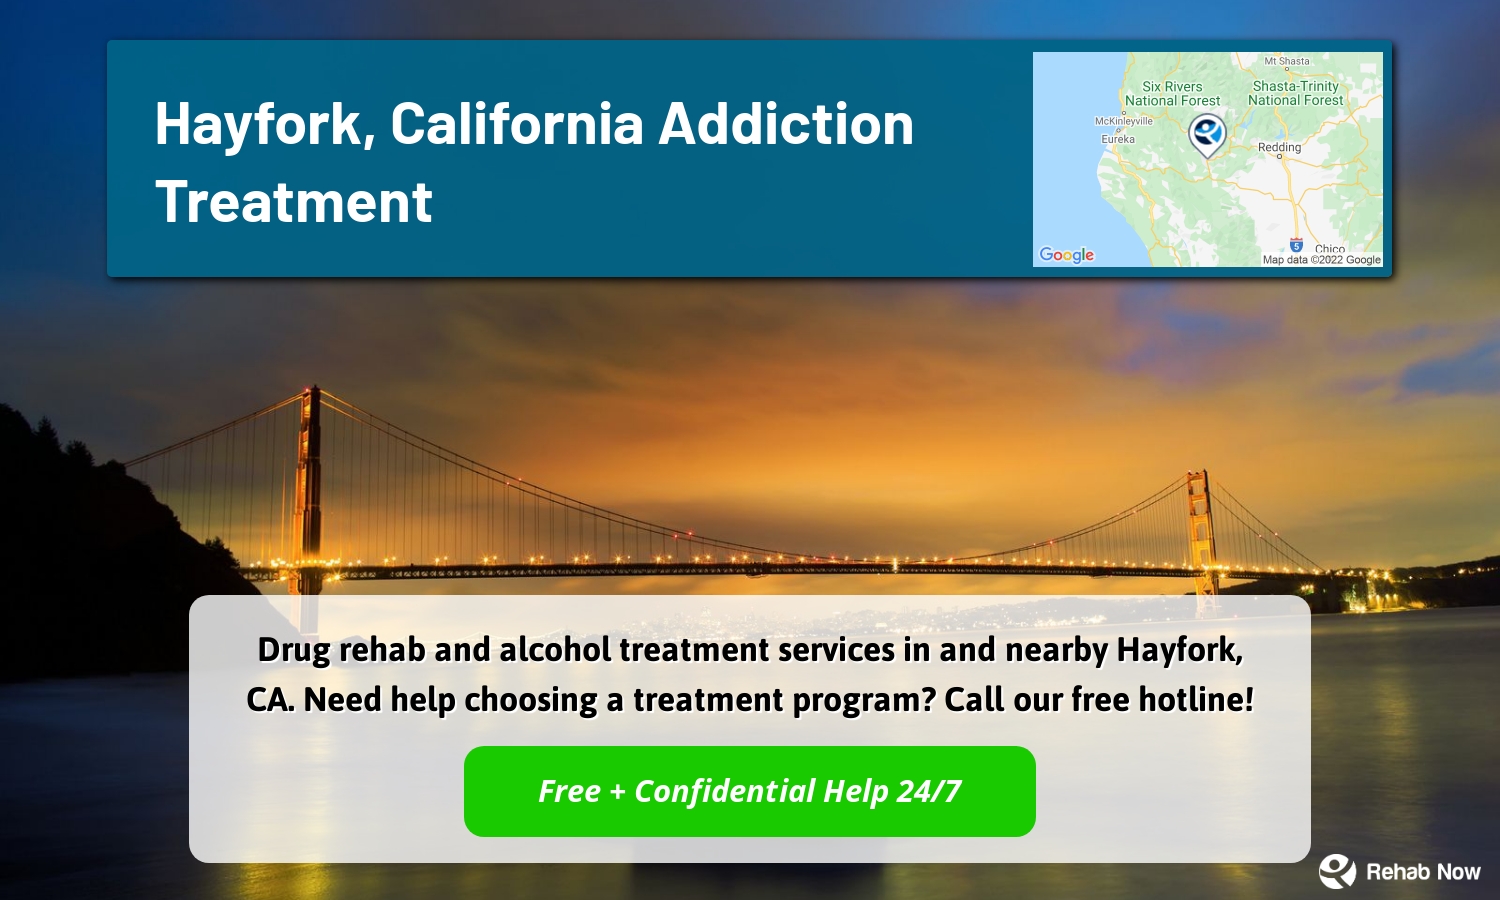 Drug rehab and alcohol treatment services in and nearby Hayfork, CA. Need help choosing a treatment program? Call our free hotline!